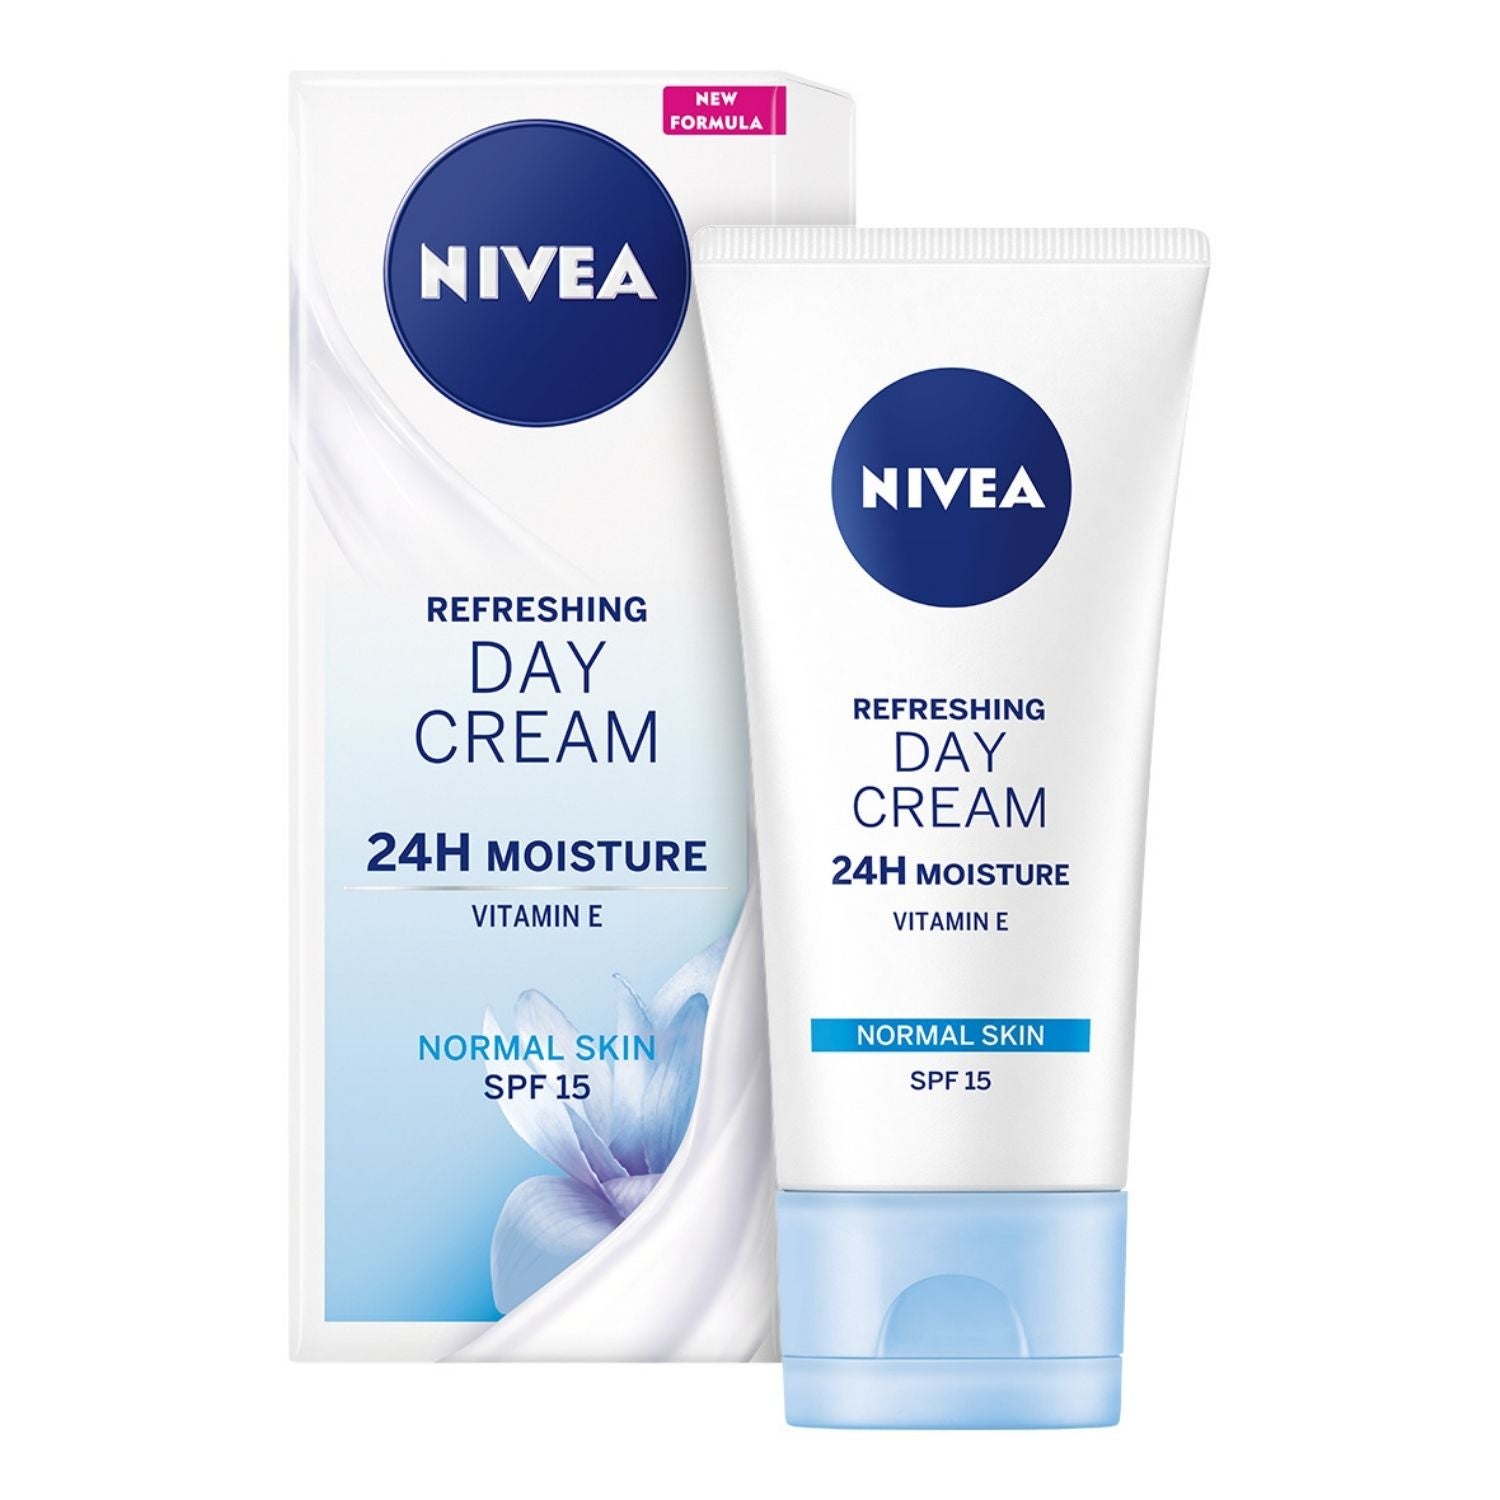 Nivea Daily Essentials Light Moisturising Day Cream For Norm/Comb Skin - 50ml 1 Shaws Department Stores